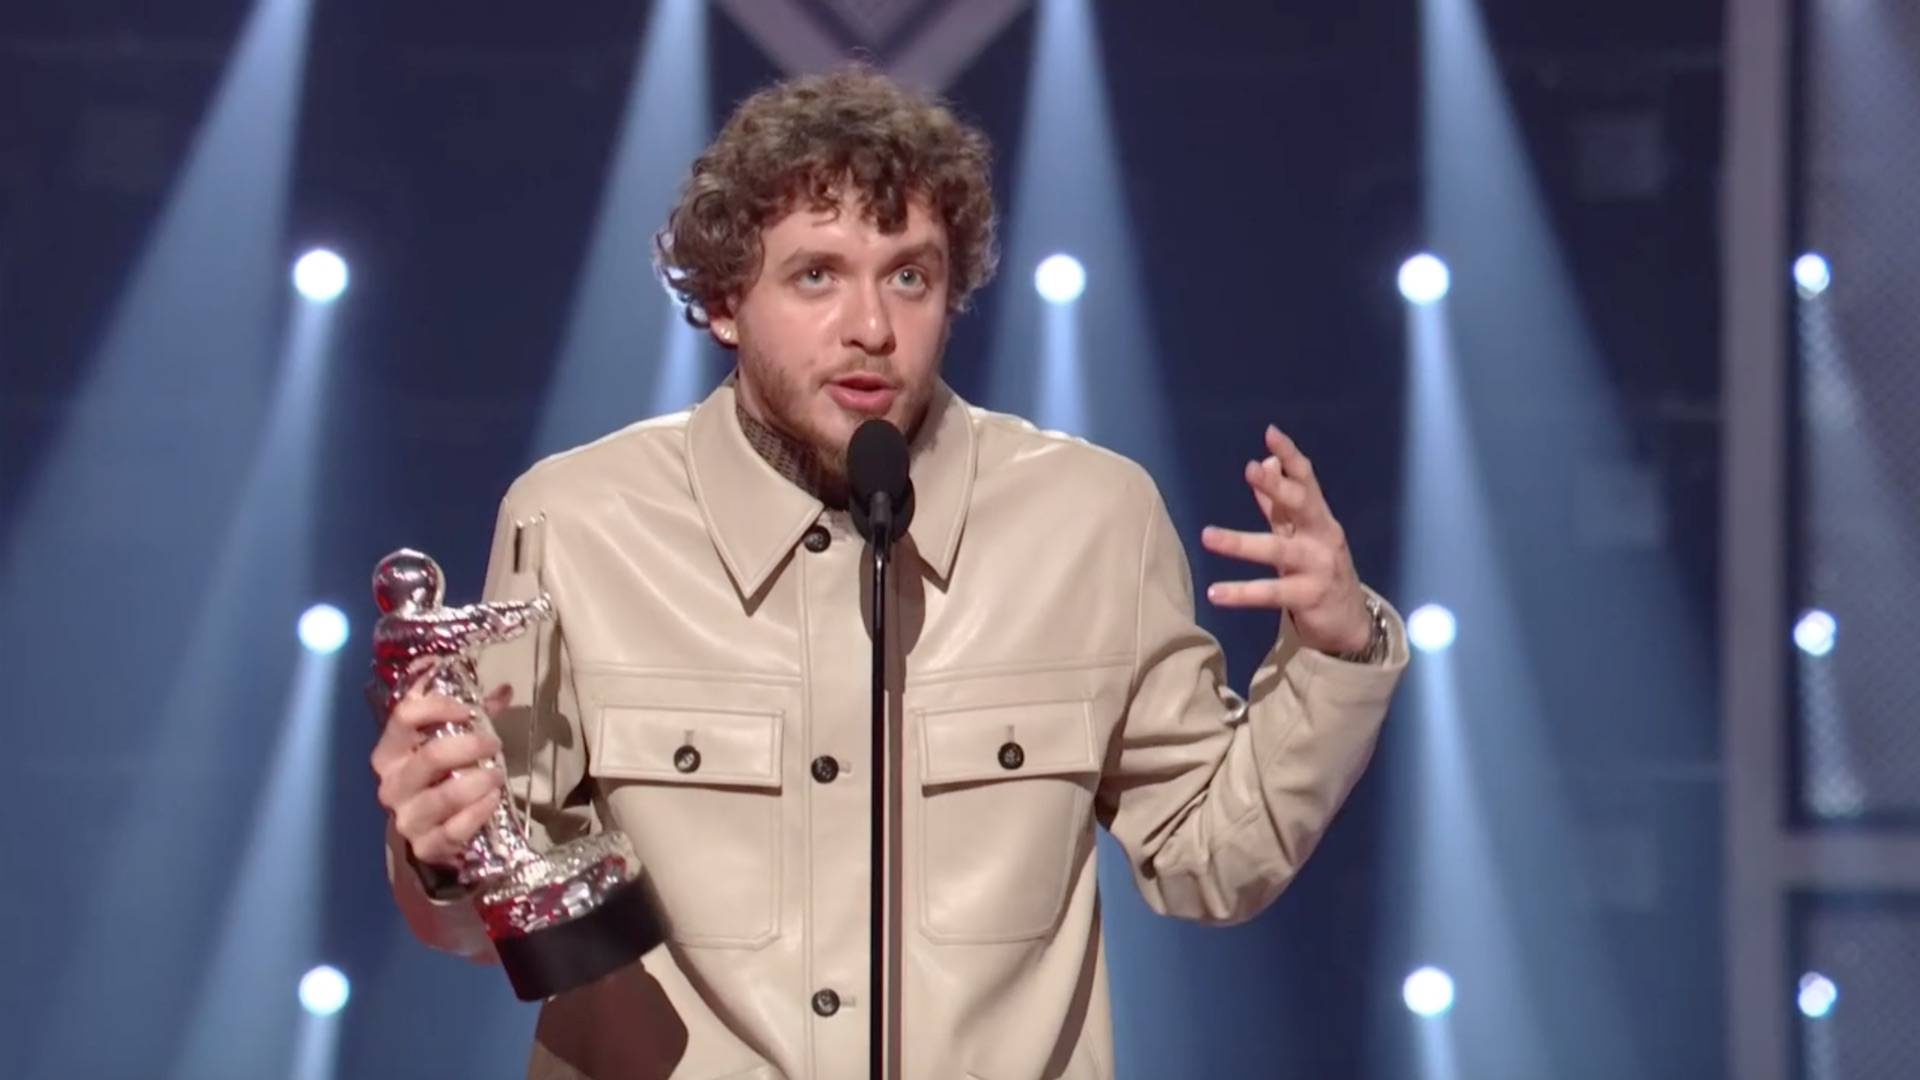 Jack Harlow accepts the award for Song of the Summer at the VMAs 2022.